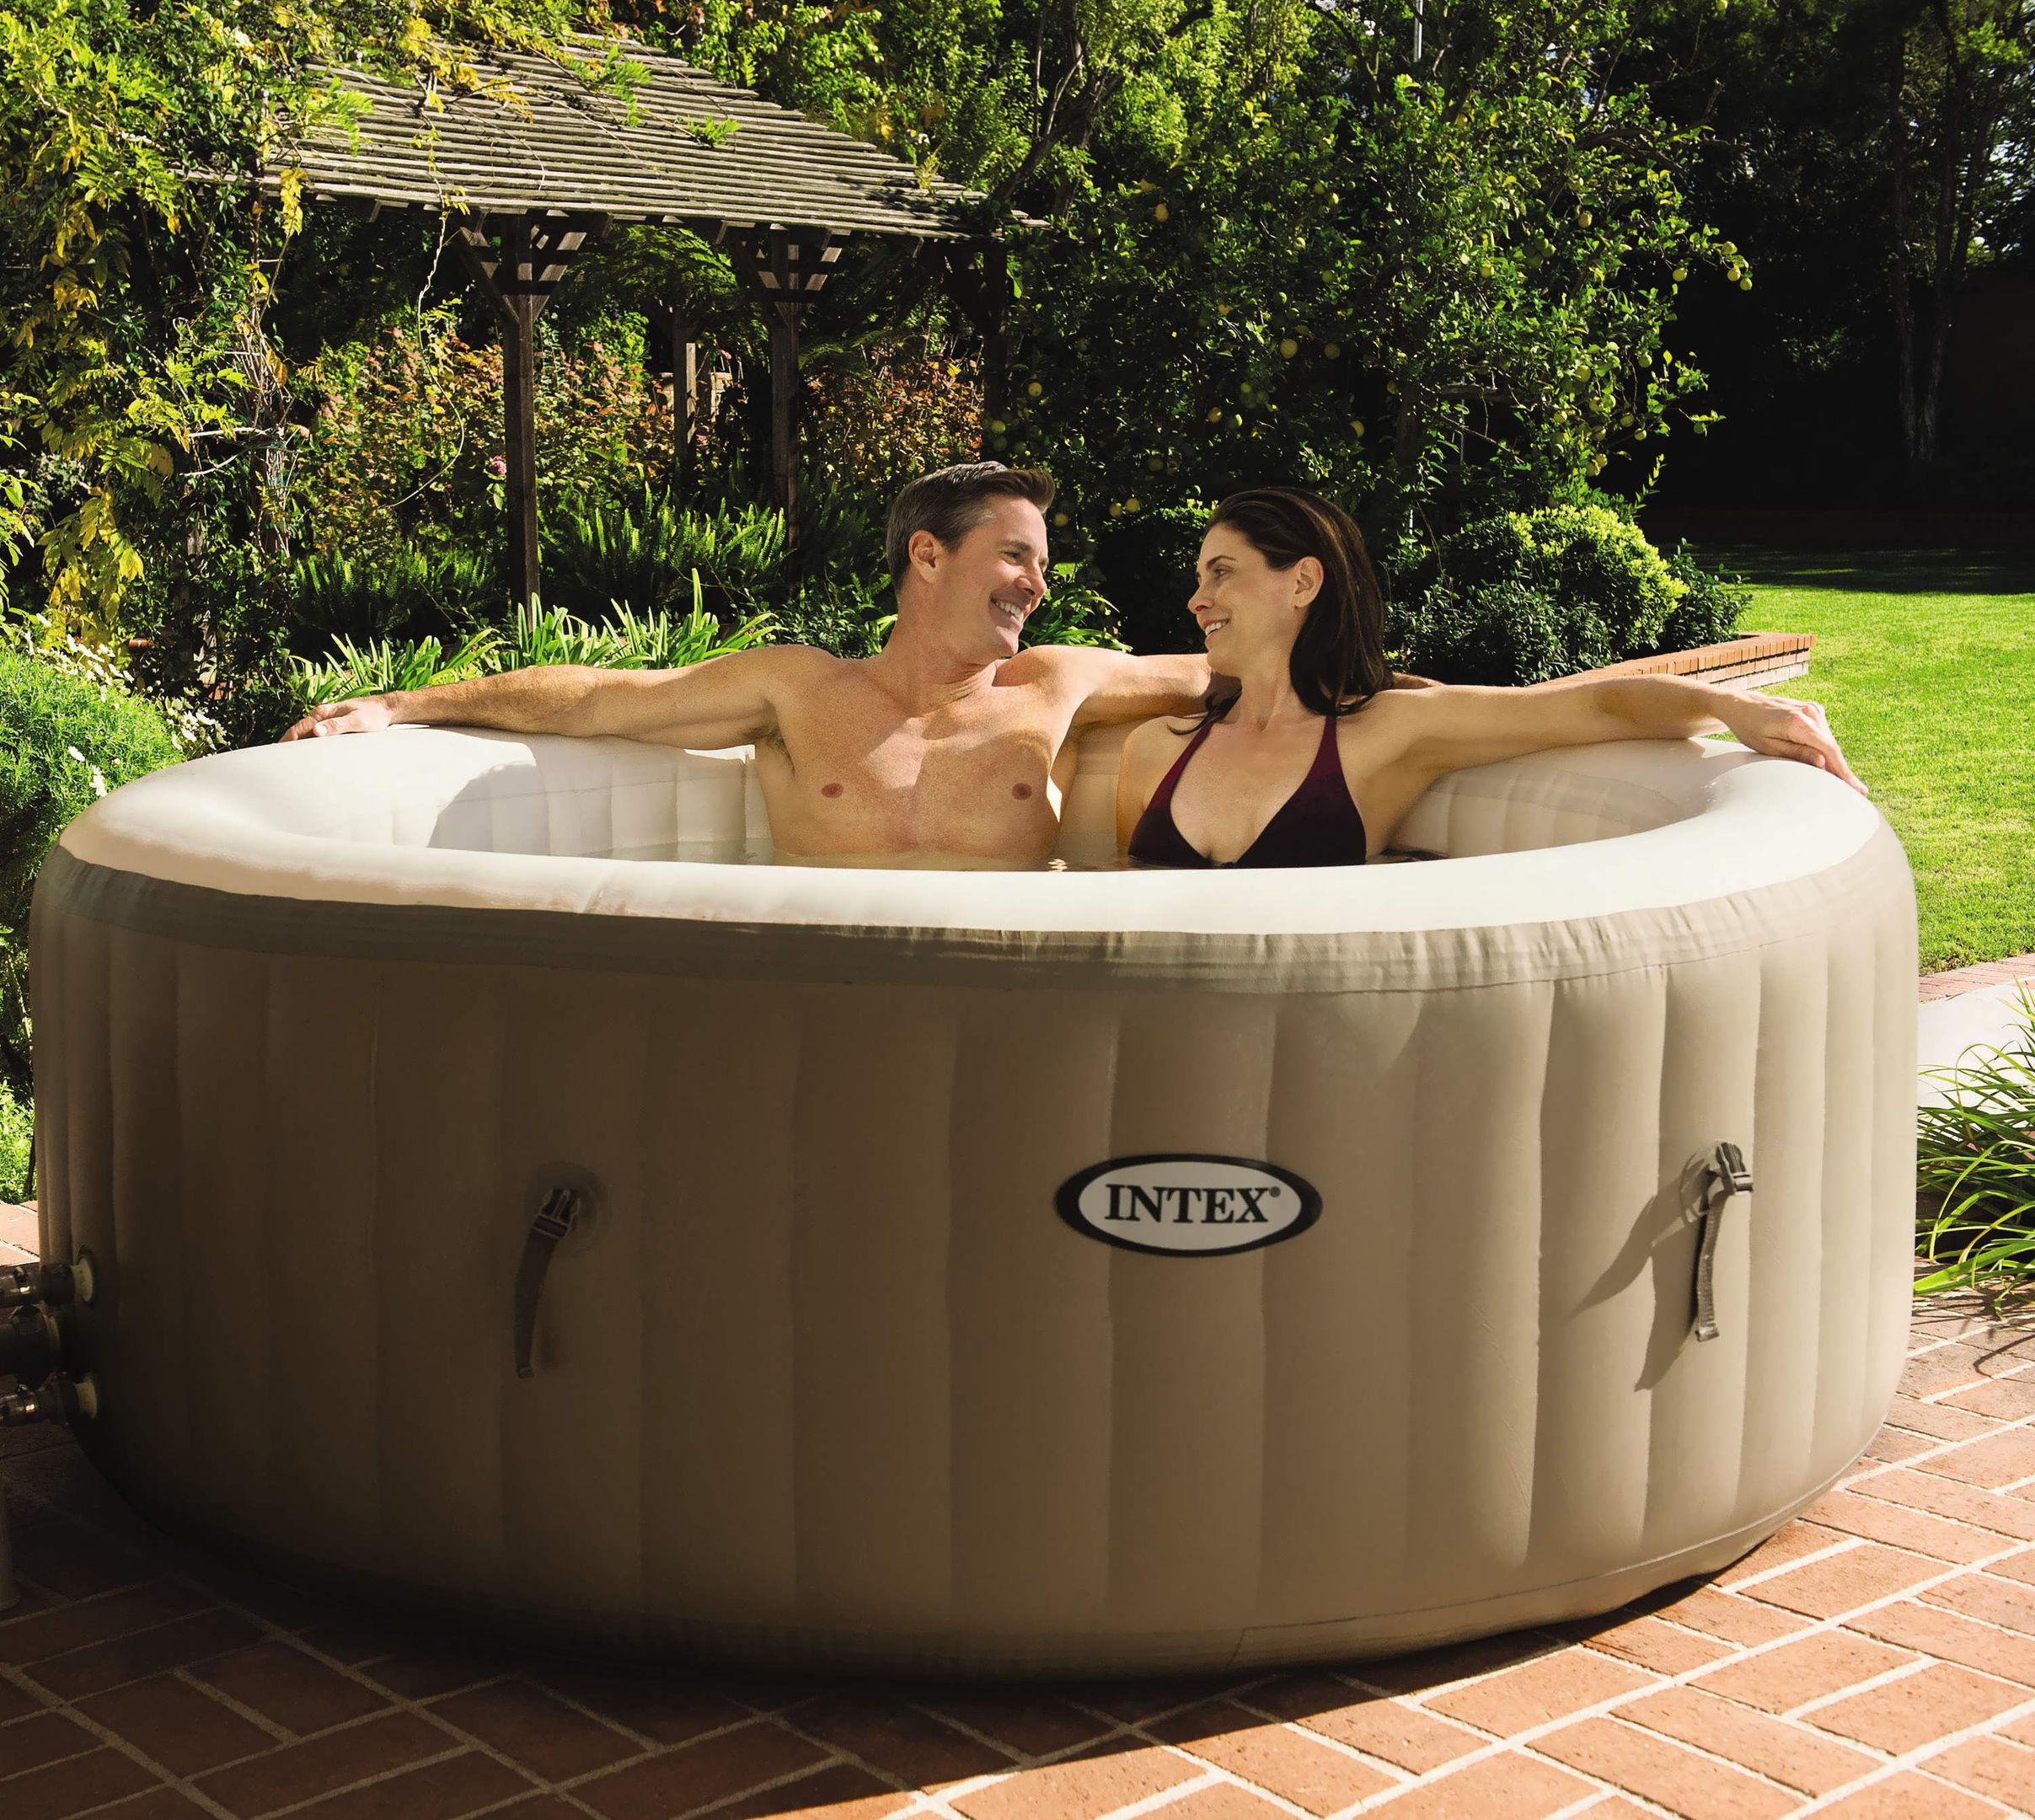 300 Aldi Hot Tub Sells Out Online Within Hours Of Going On